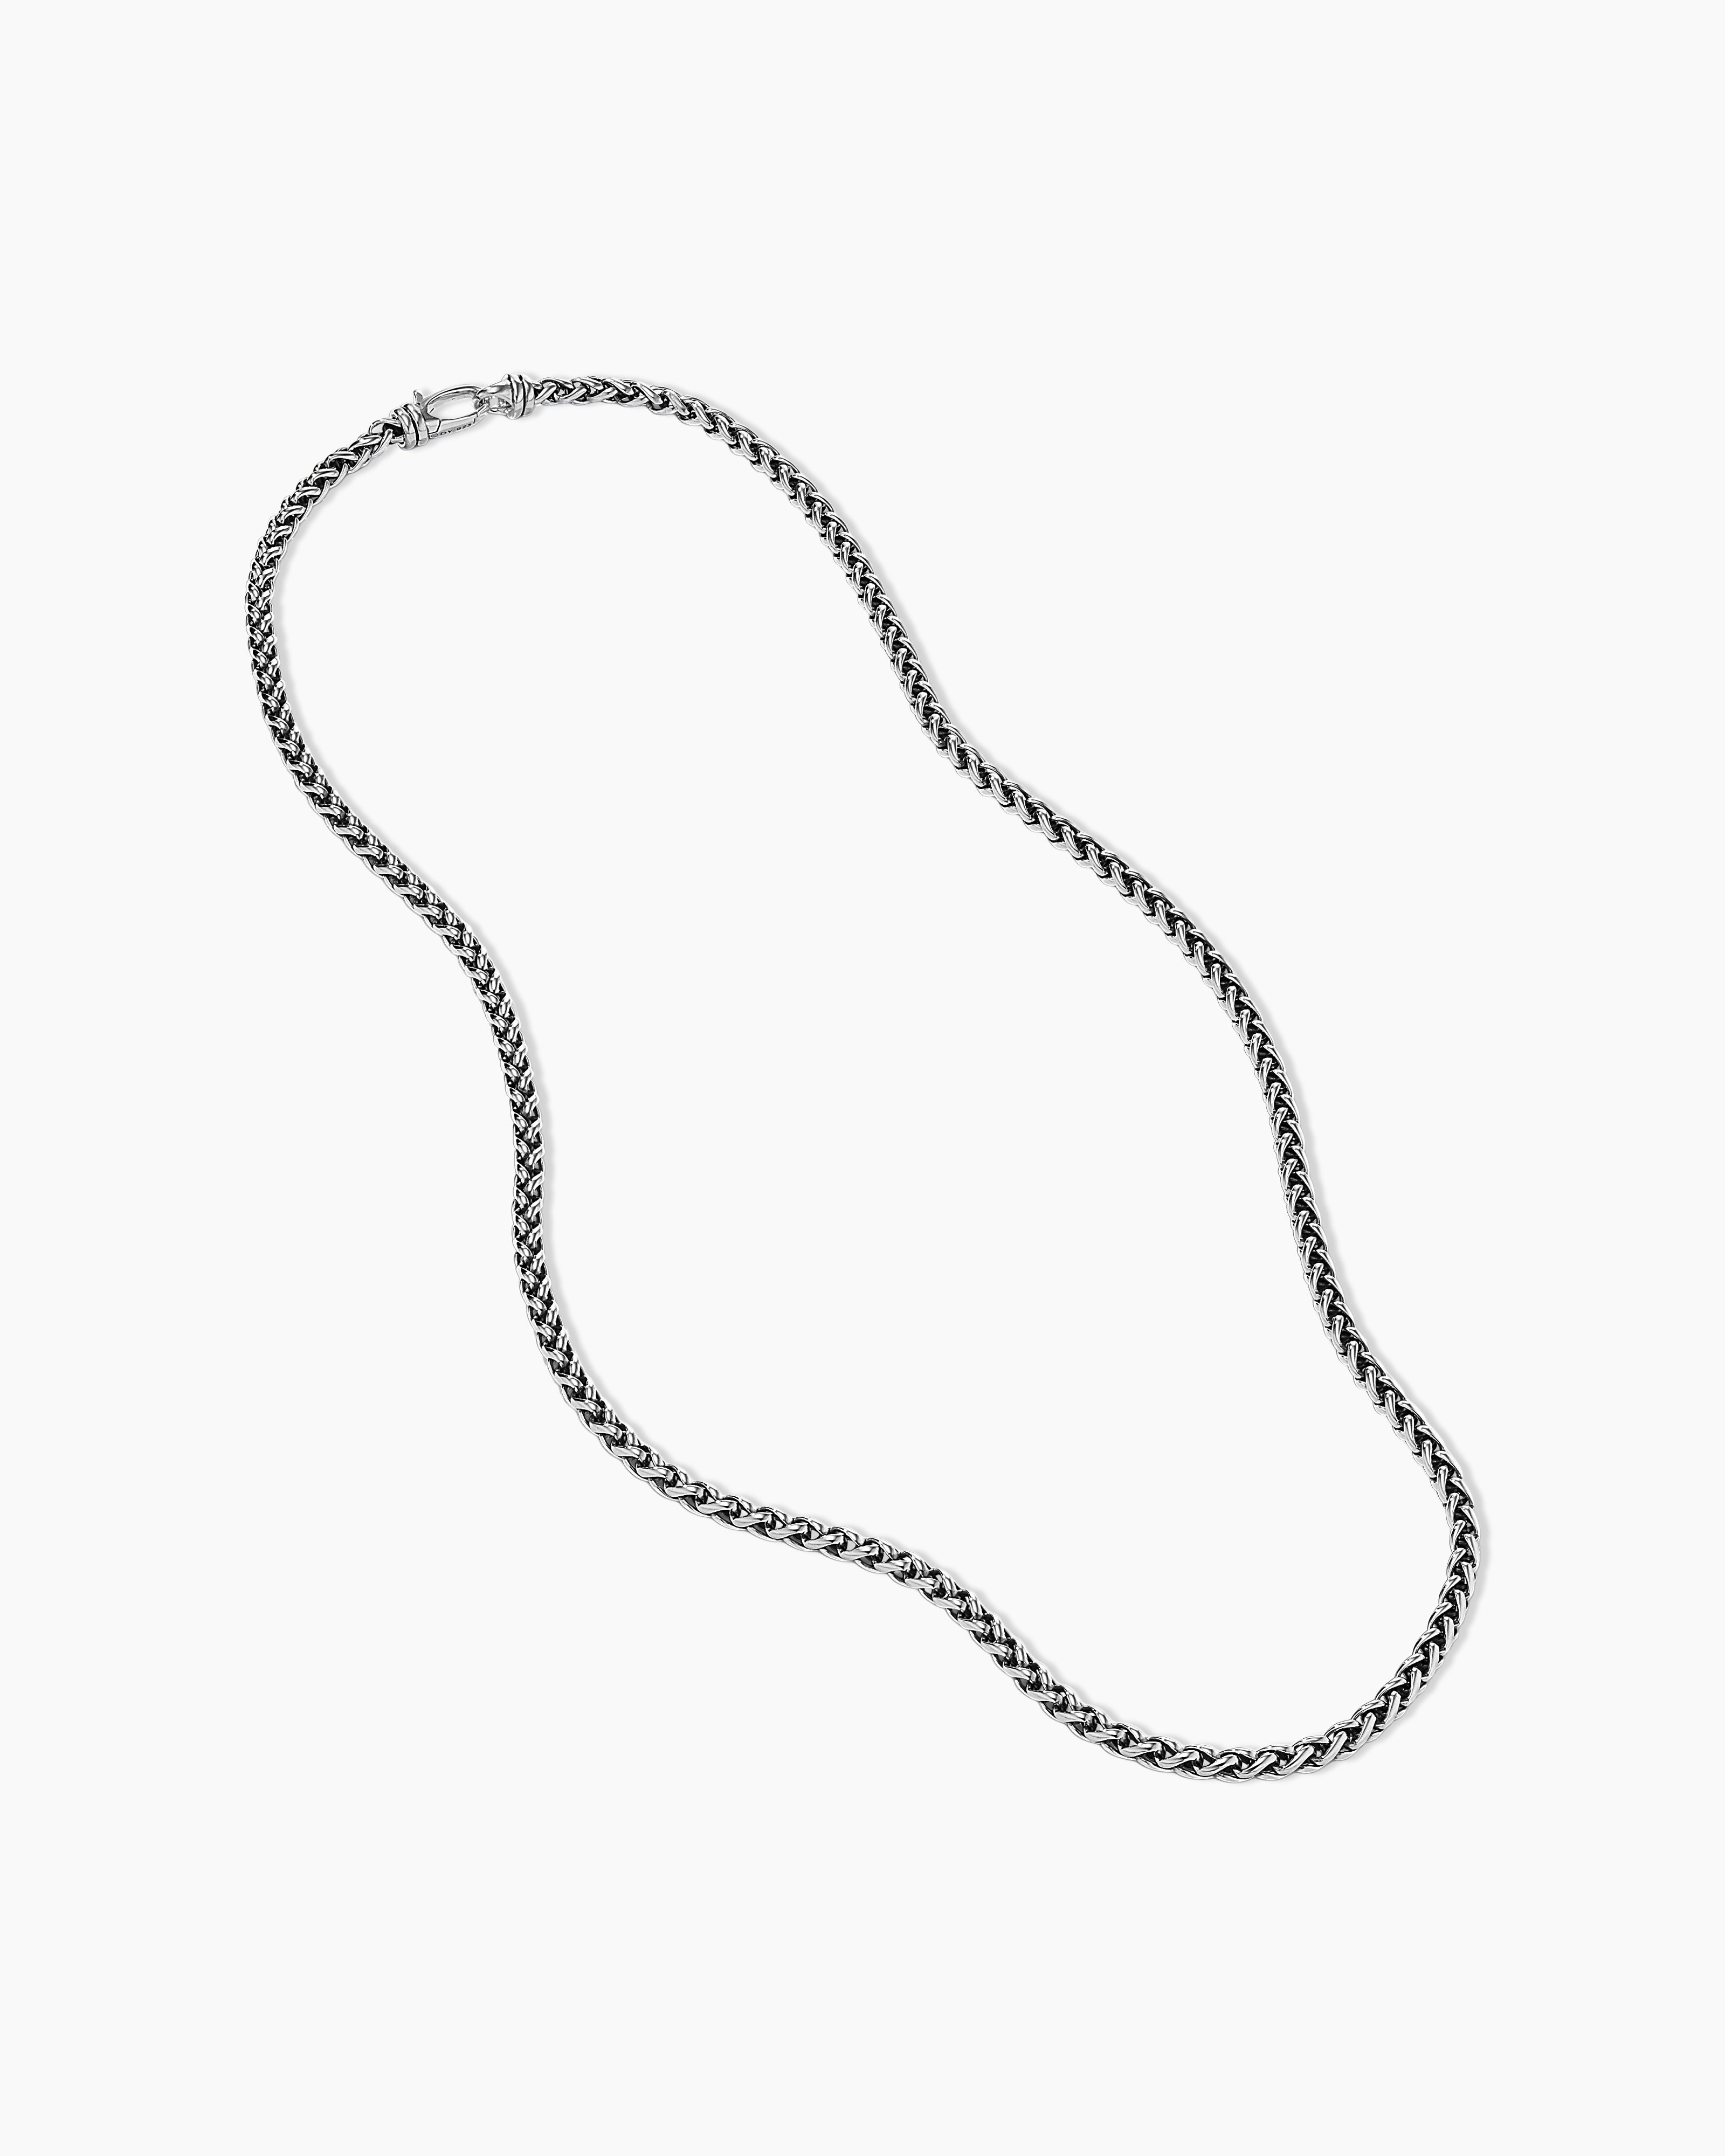 Solid 925 Silver Snake Chain Necklace, Raund Snake Chain for Man for Women,  Silver Men's Jewelry, Silver Chains, Valentines Gifts 